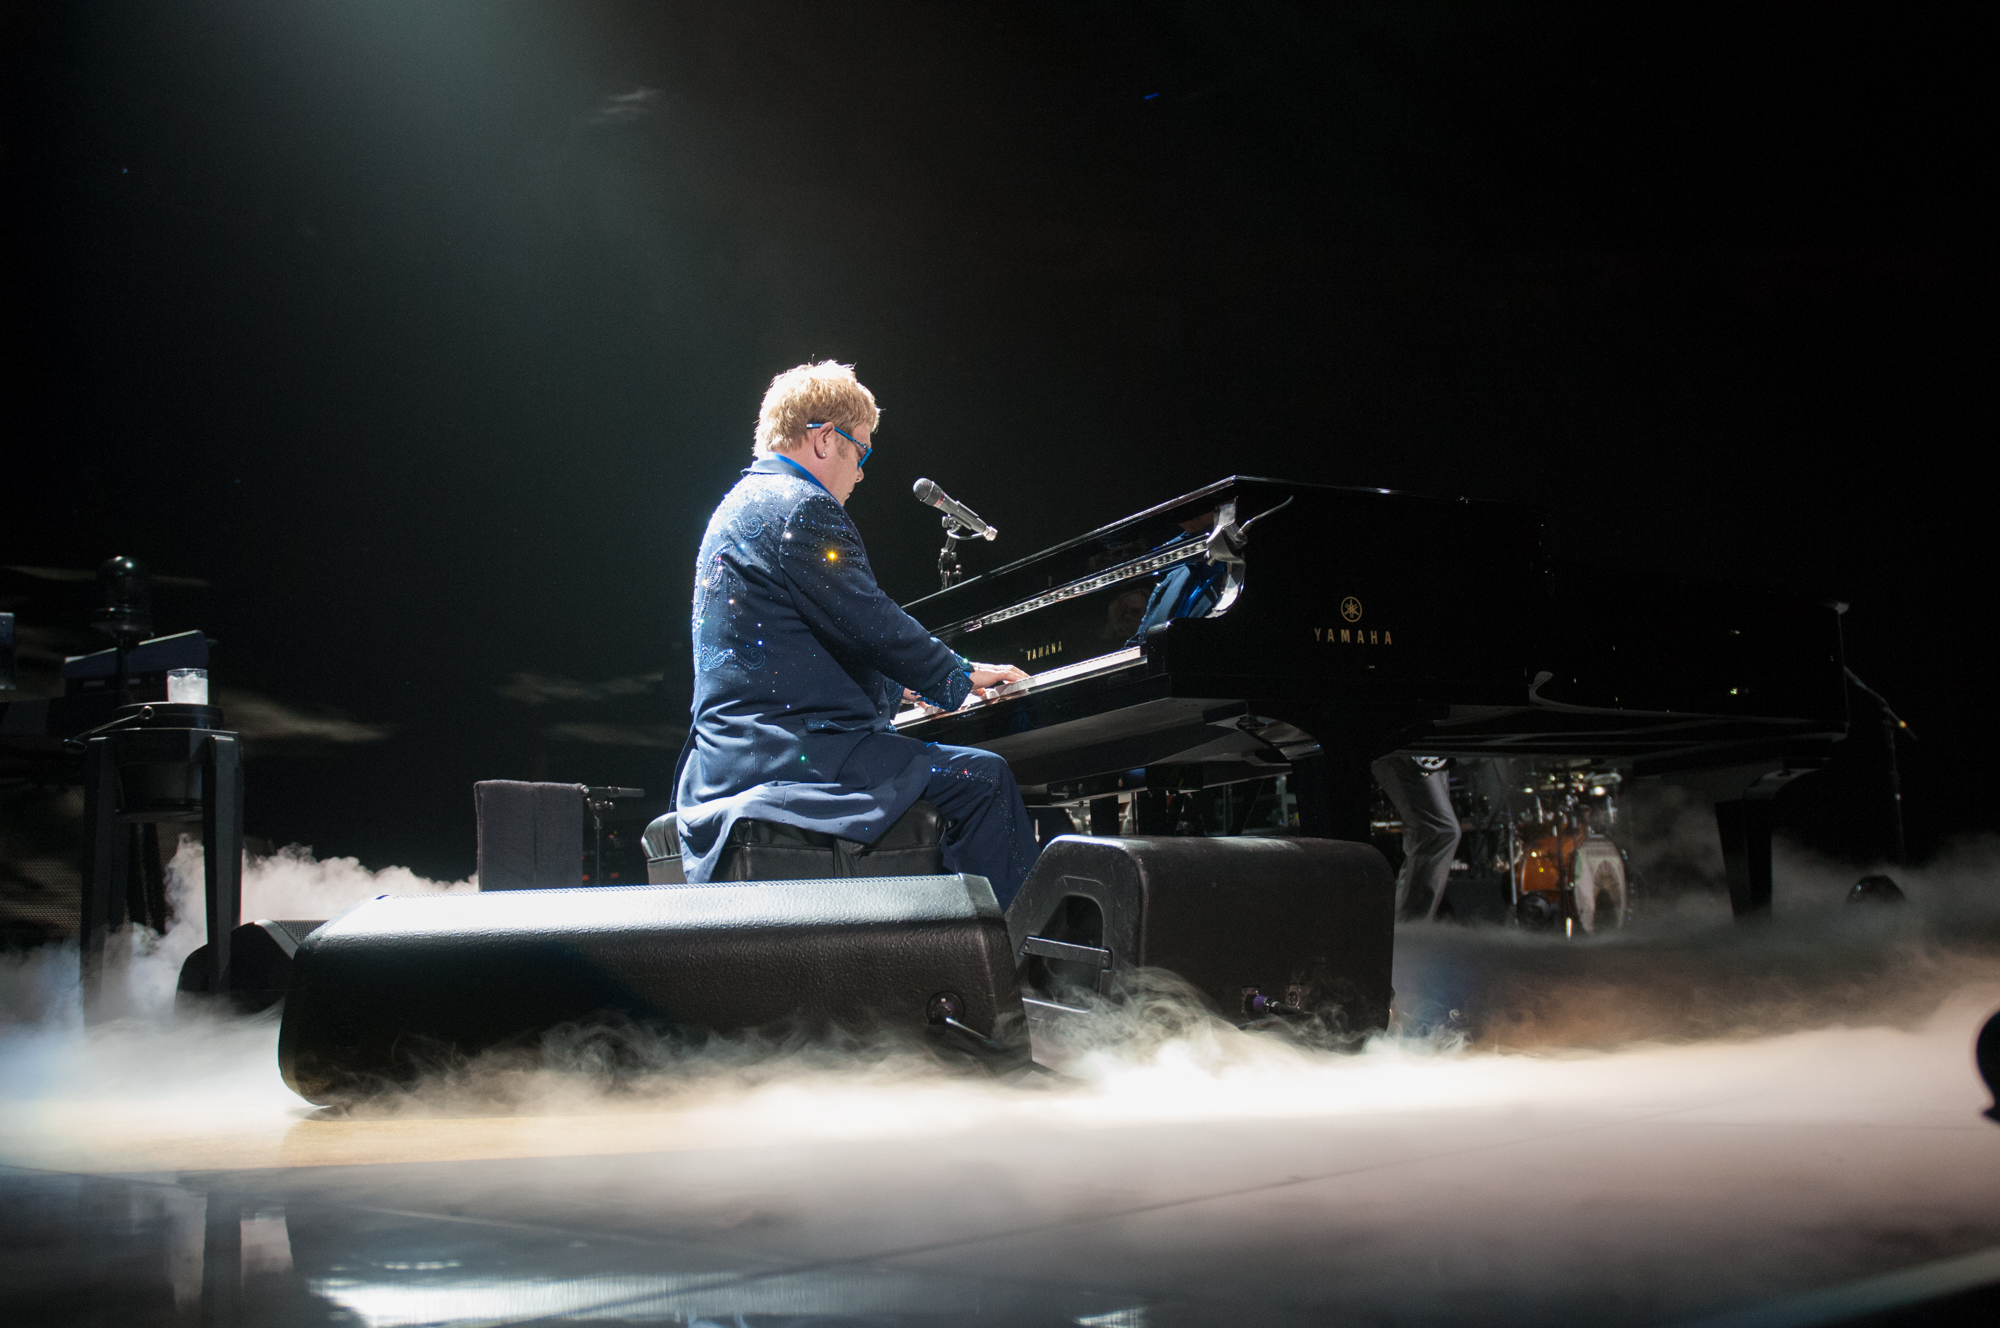 Elton John was as classy as ever stopping after each song to happily engage the fans and throw a smile.